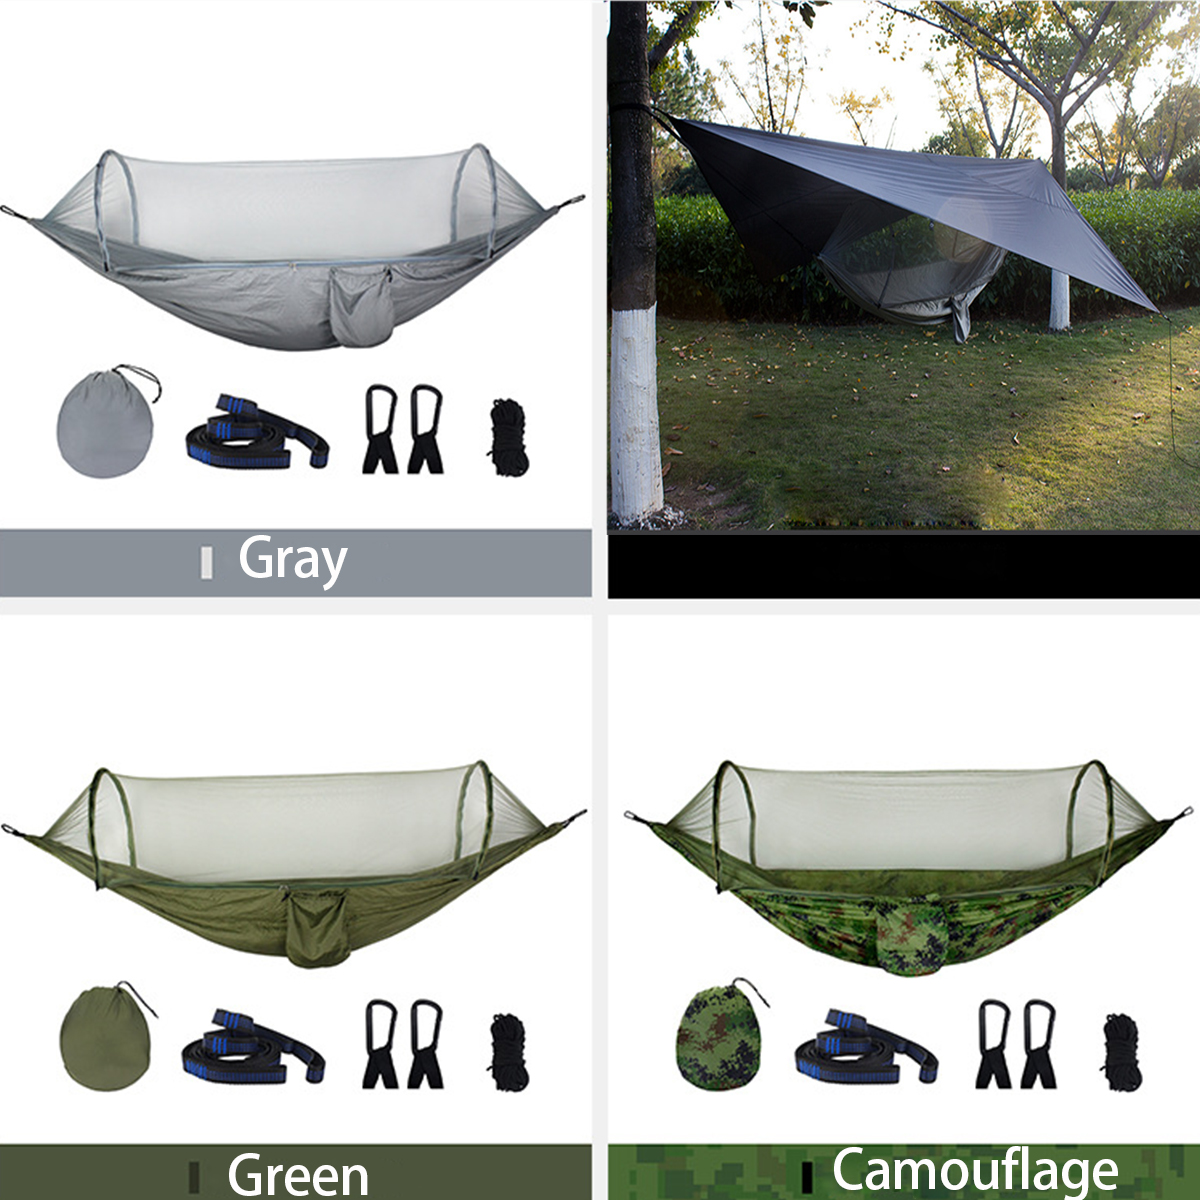 270x140cm-Auto-Quick-Open-Hammock-Outdoor-Camping-Hanging-Swing-Bed-With-Mosquito-Net-Max-Load-250kg-1549846-7